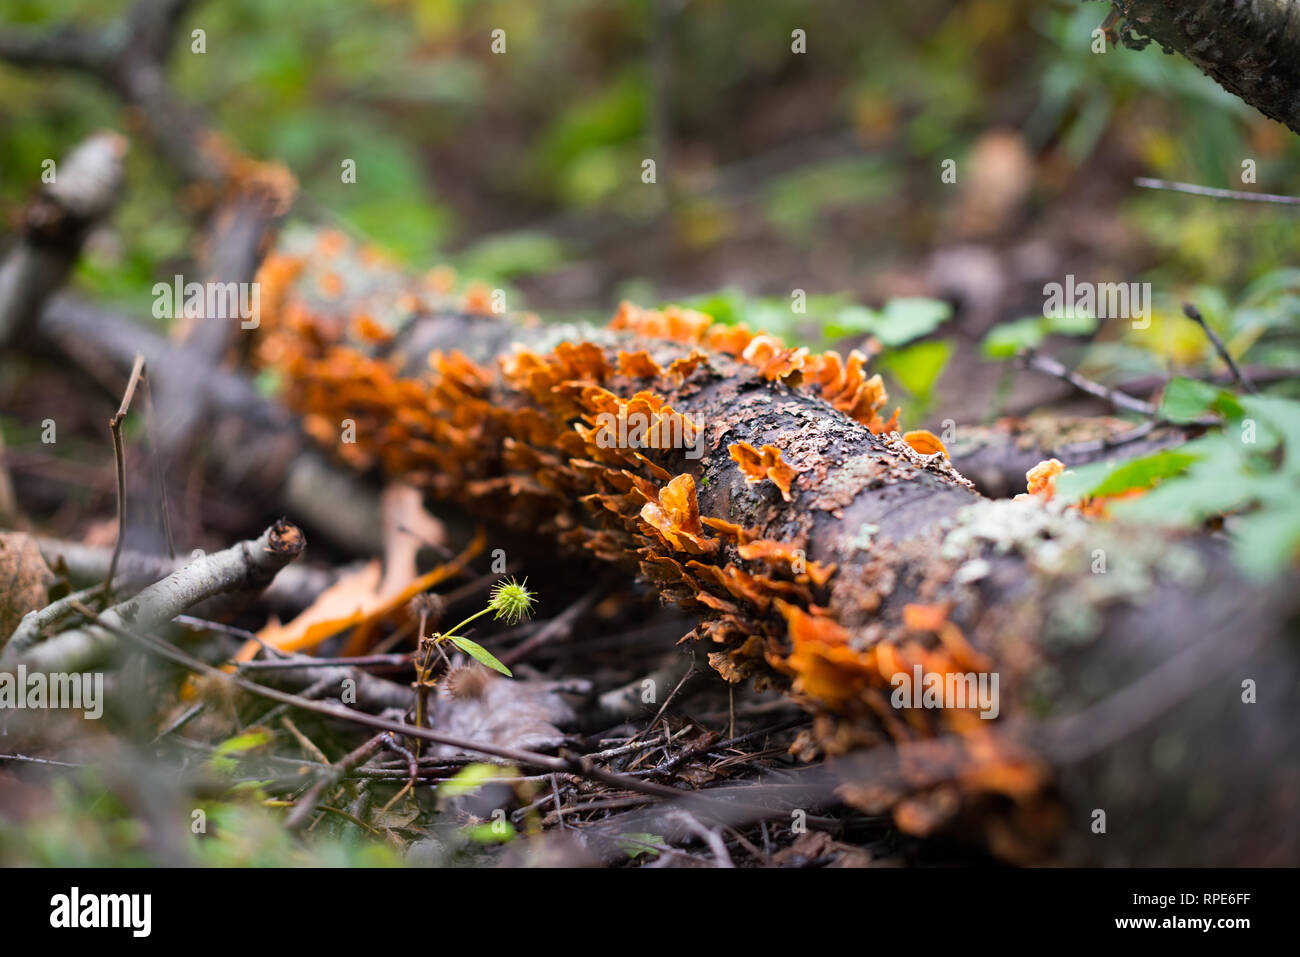 Mushrooms growing on log in Allegheny National Forest, PA Stock Photo